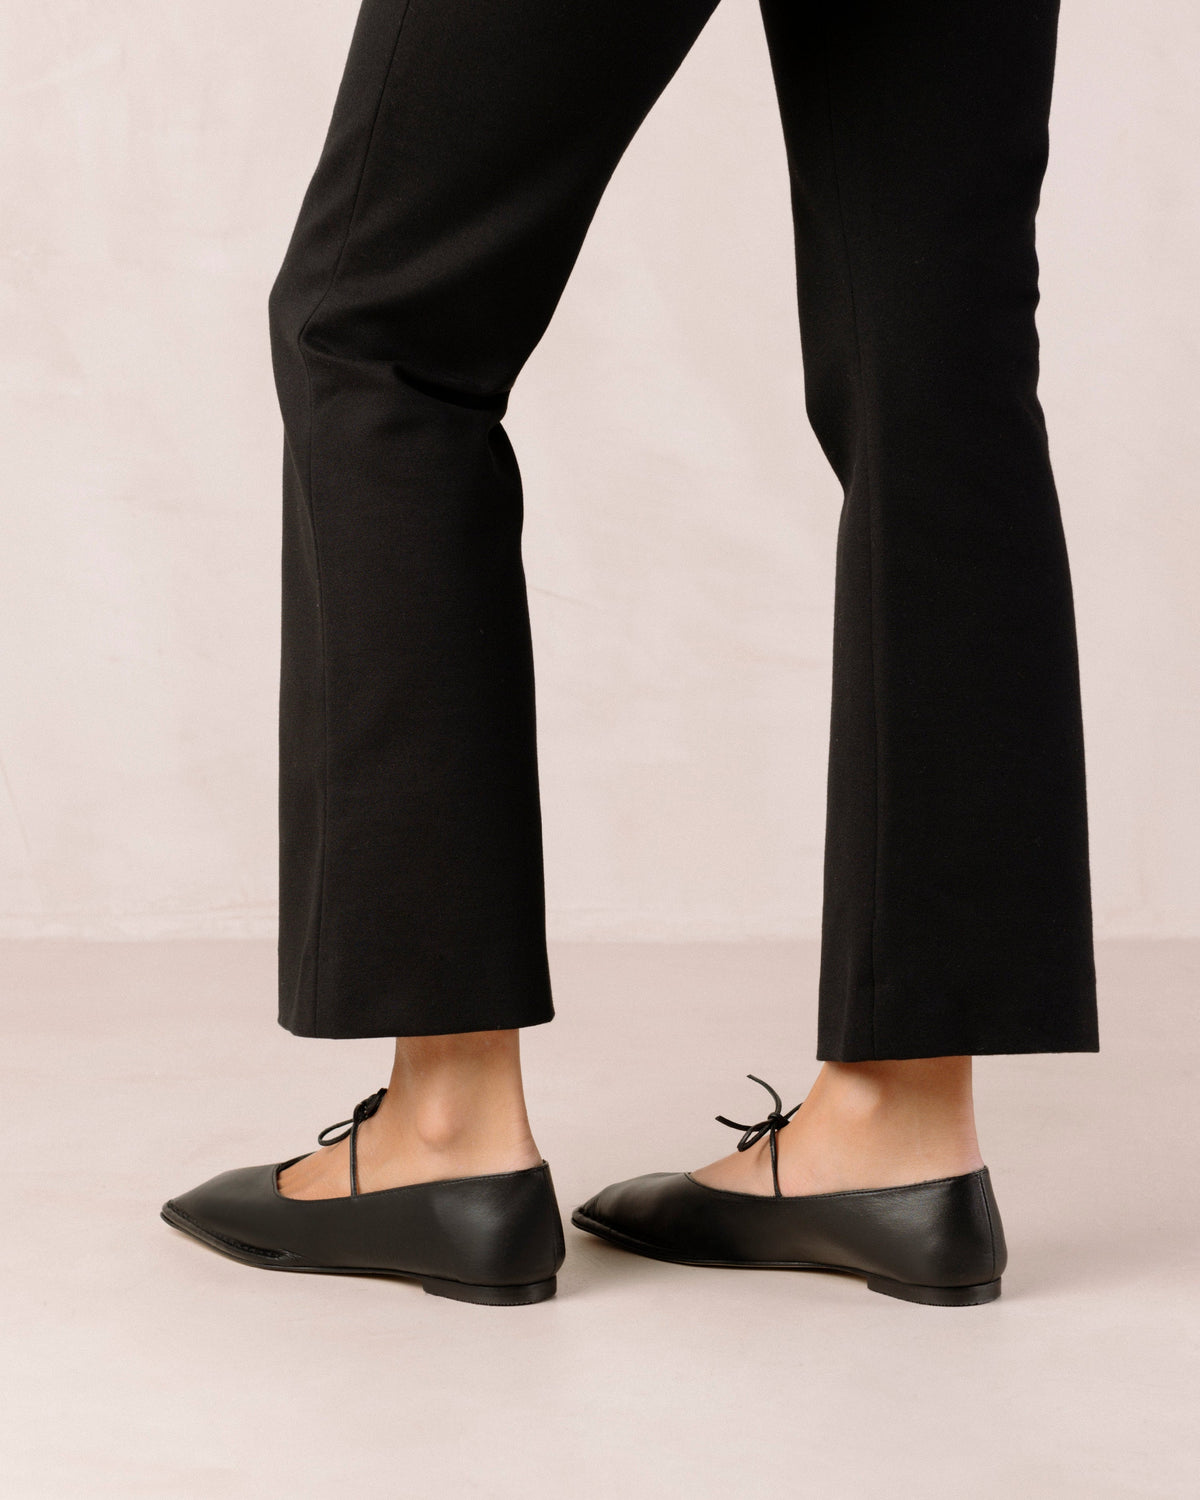 Sway - Black Leather Flats